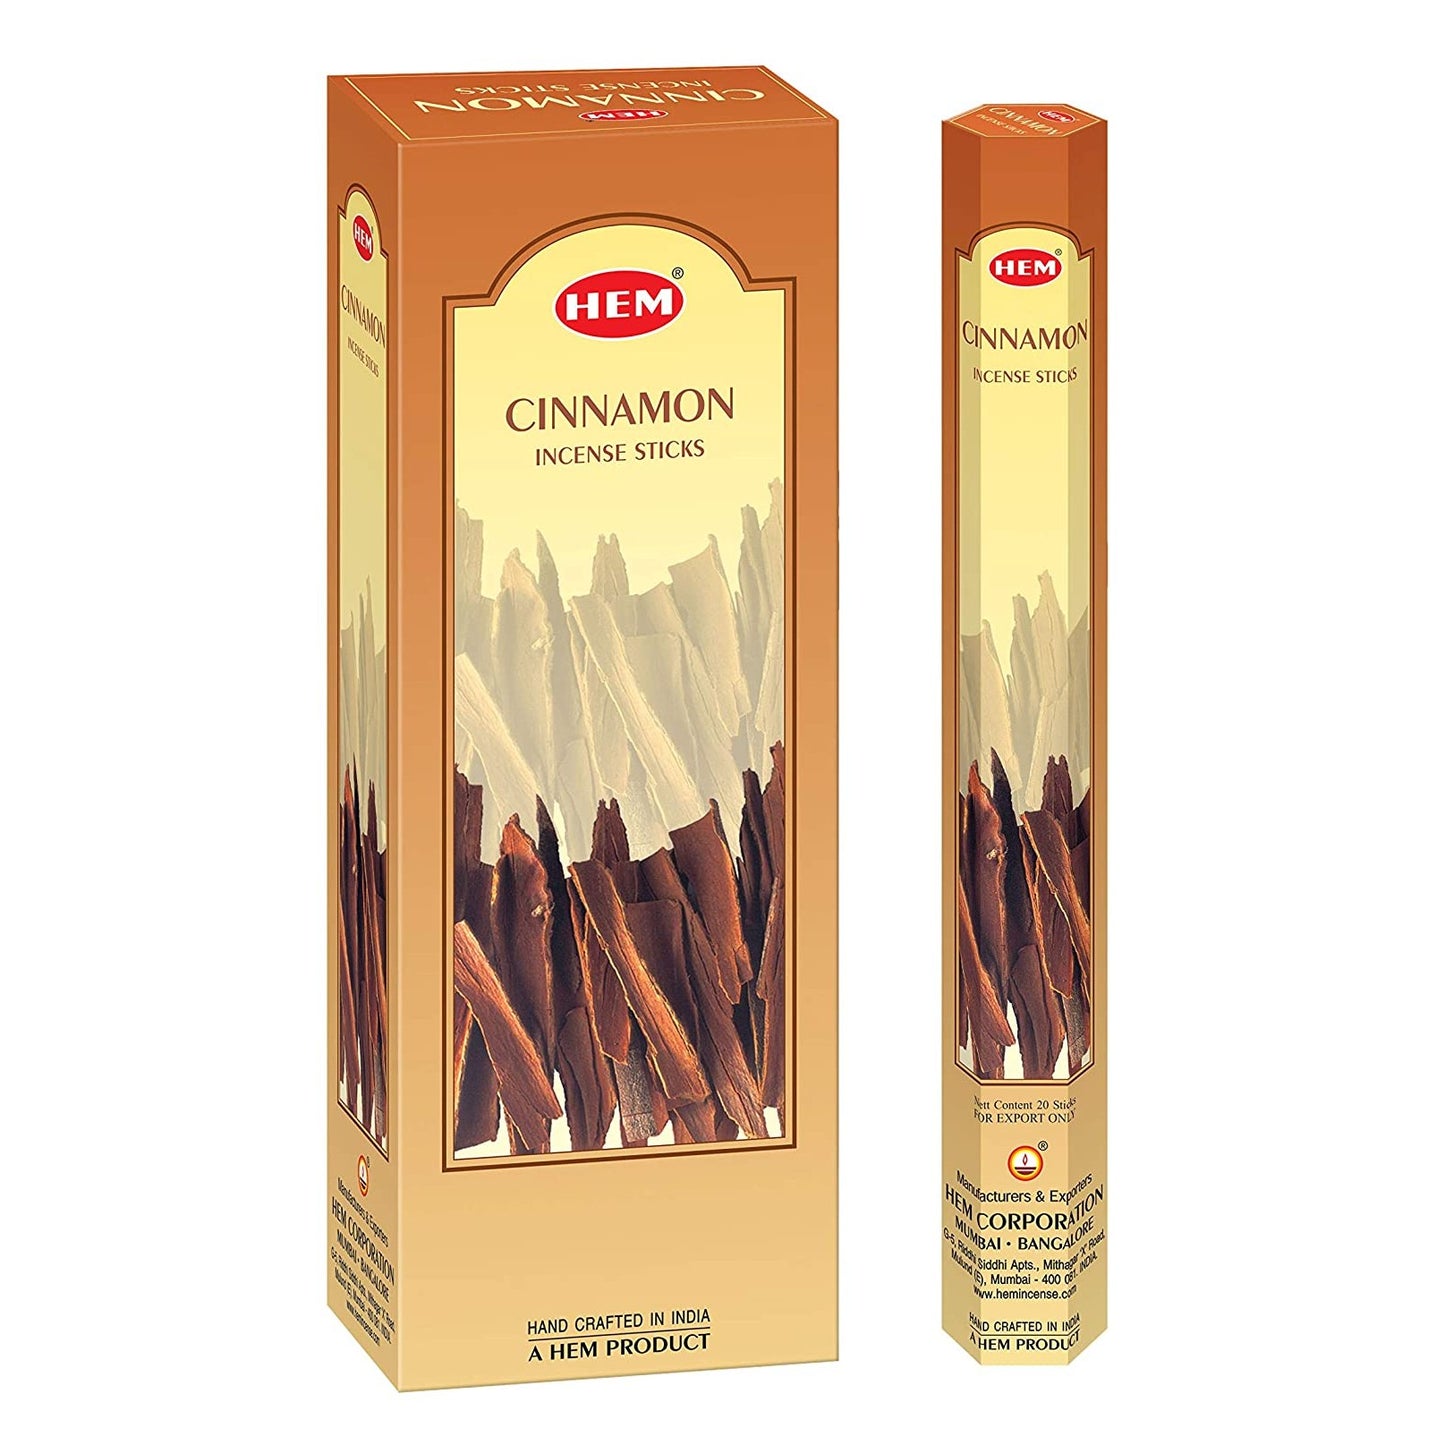 HEM Cinnamon- Canela Incense Sticks, 120 Count - Magic Crystals. Quality incense from HEM, one of the leading incense makers in India. Box containing six 20 stick tubes of incense, for 120 sticks total. HEM is world famous for its traditional incense made from select woods, resin.